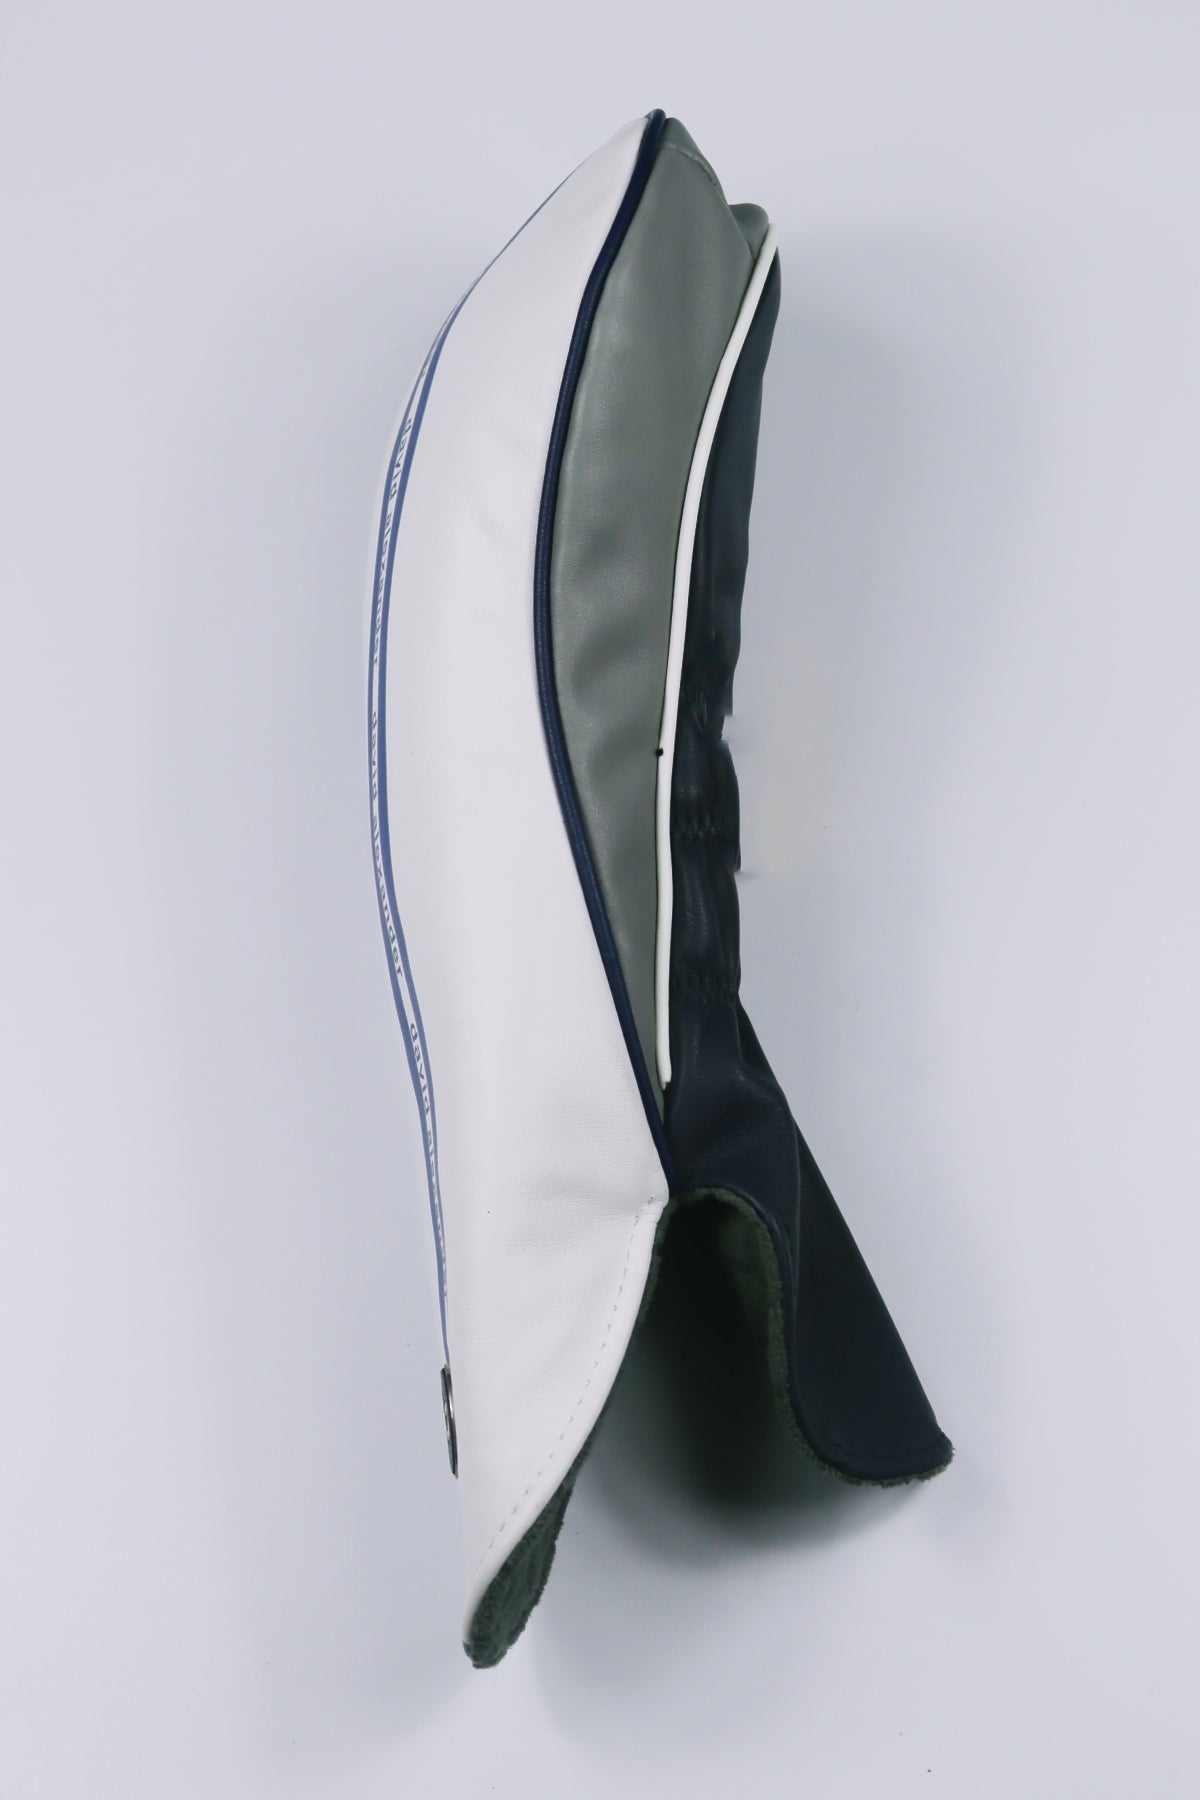 White and blue leather driver head-cover by David Alexander